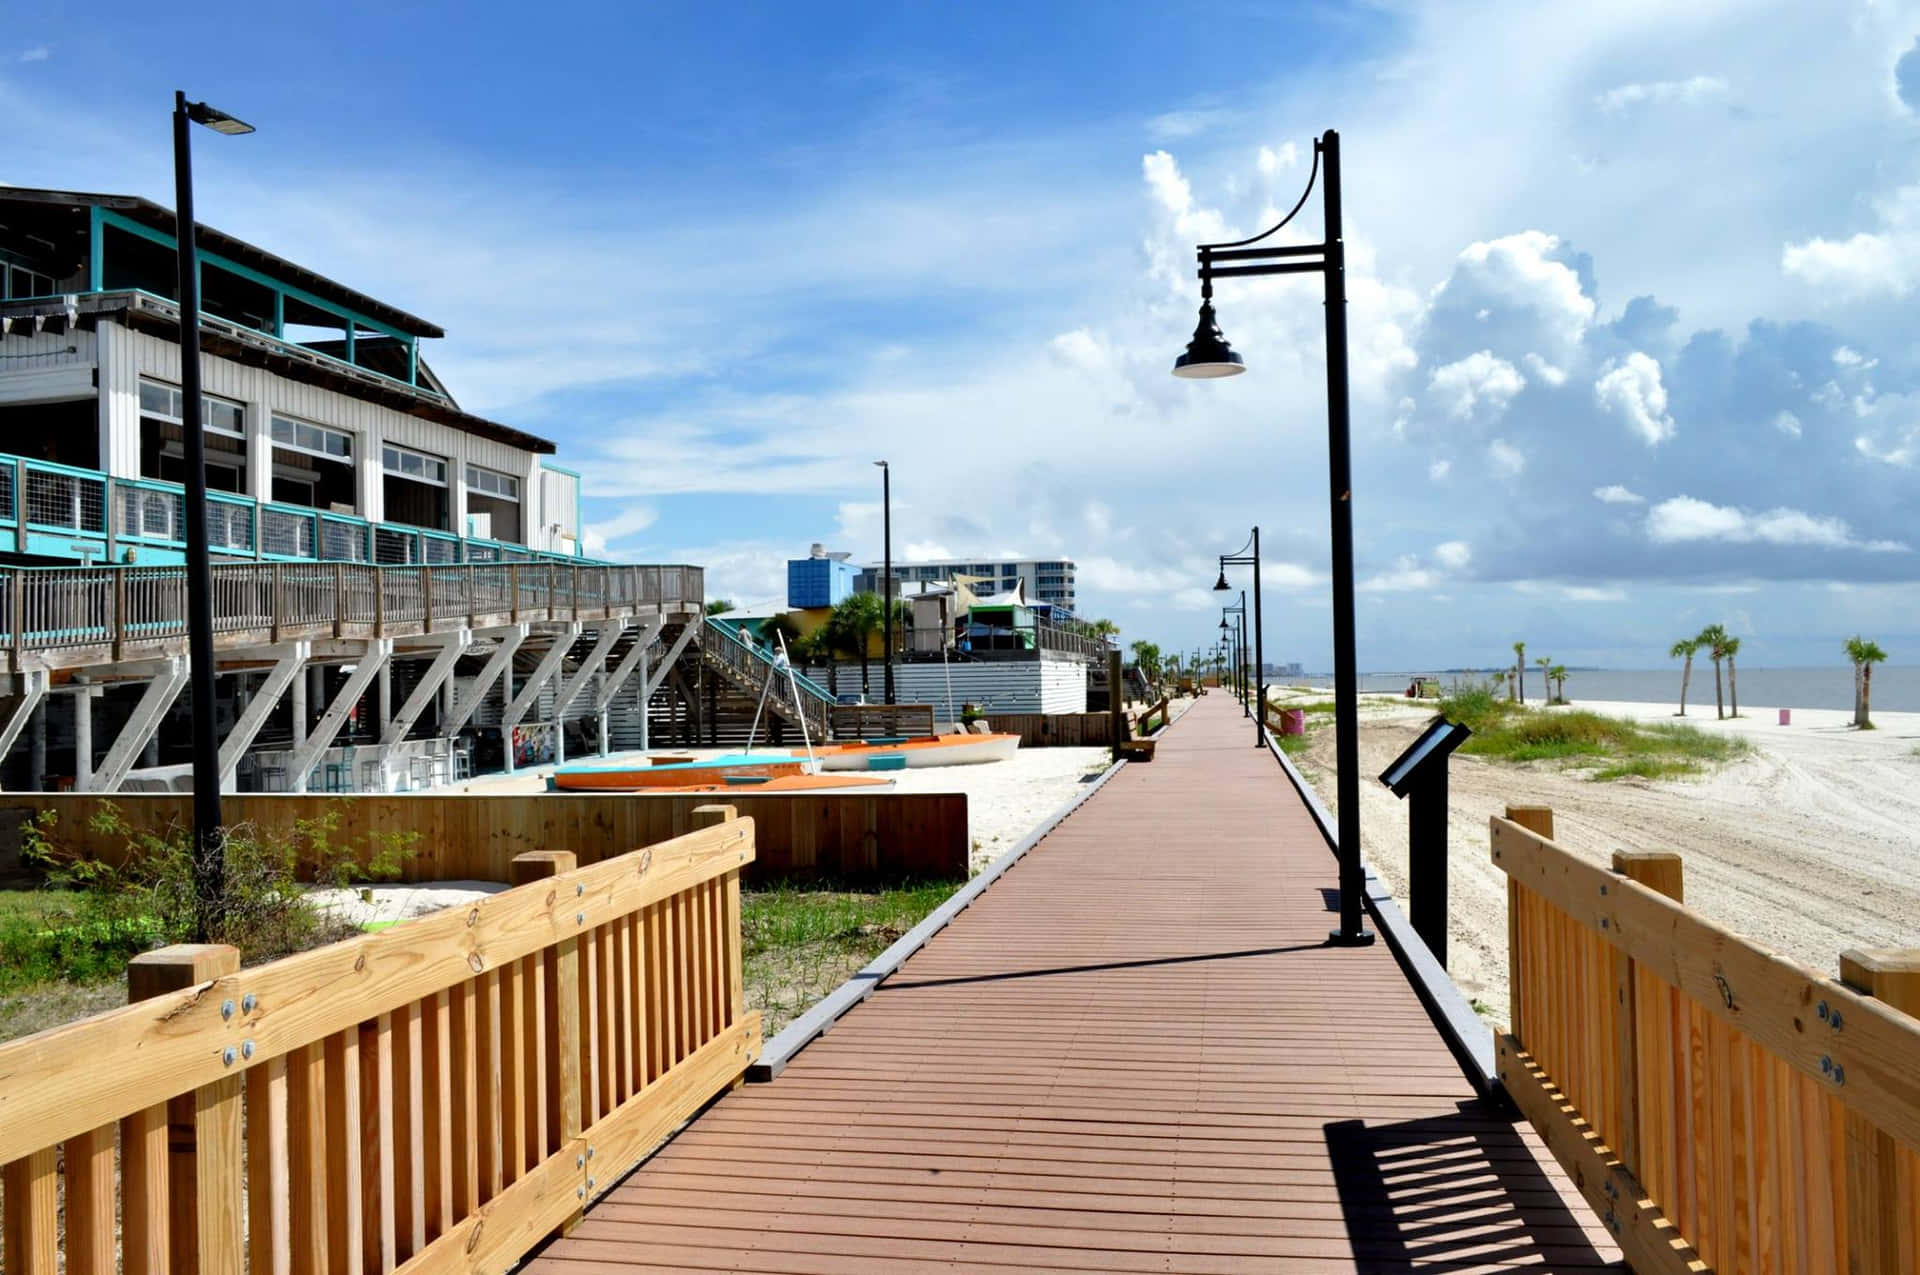 Take a stroll along the boardwalk and enjoy the sights.